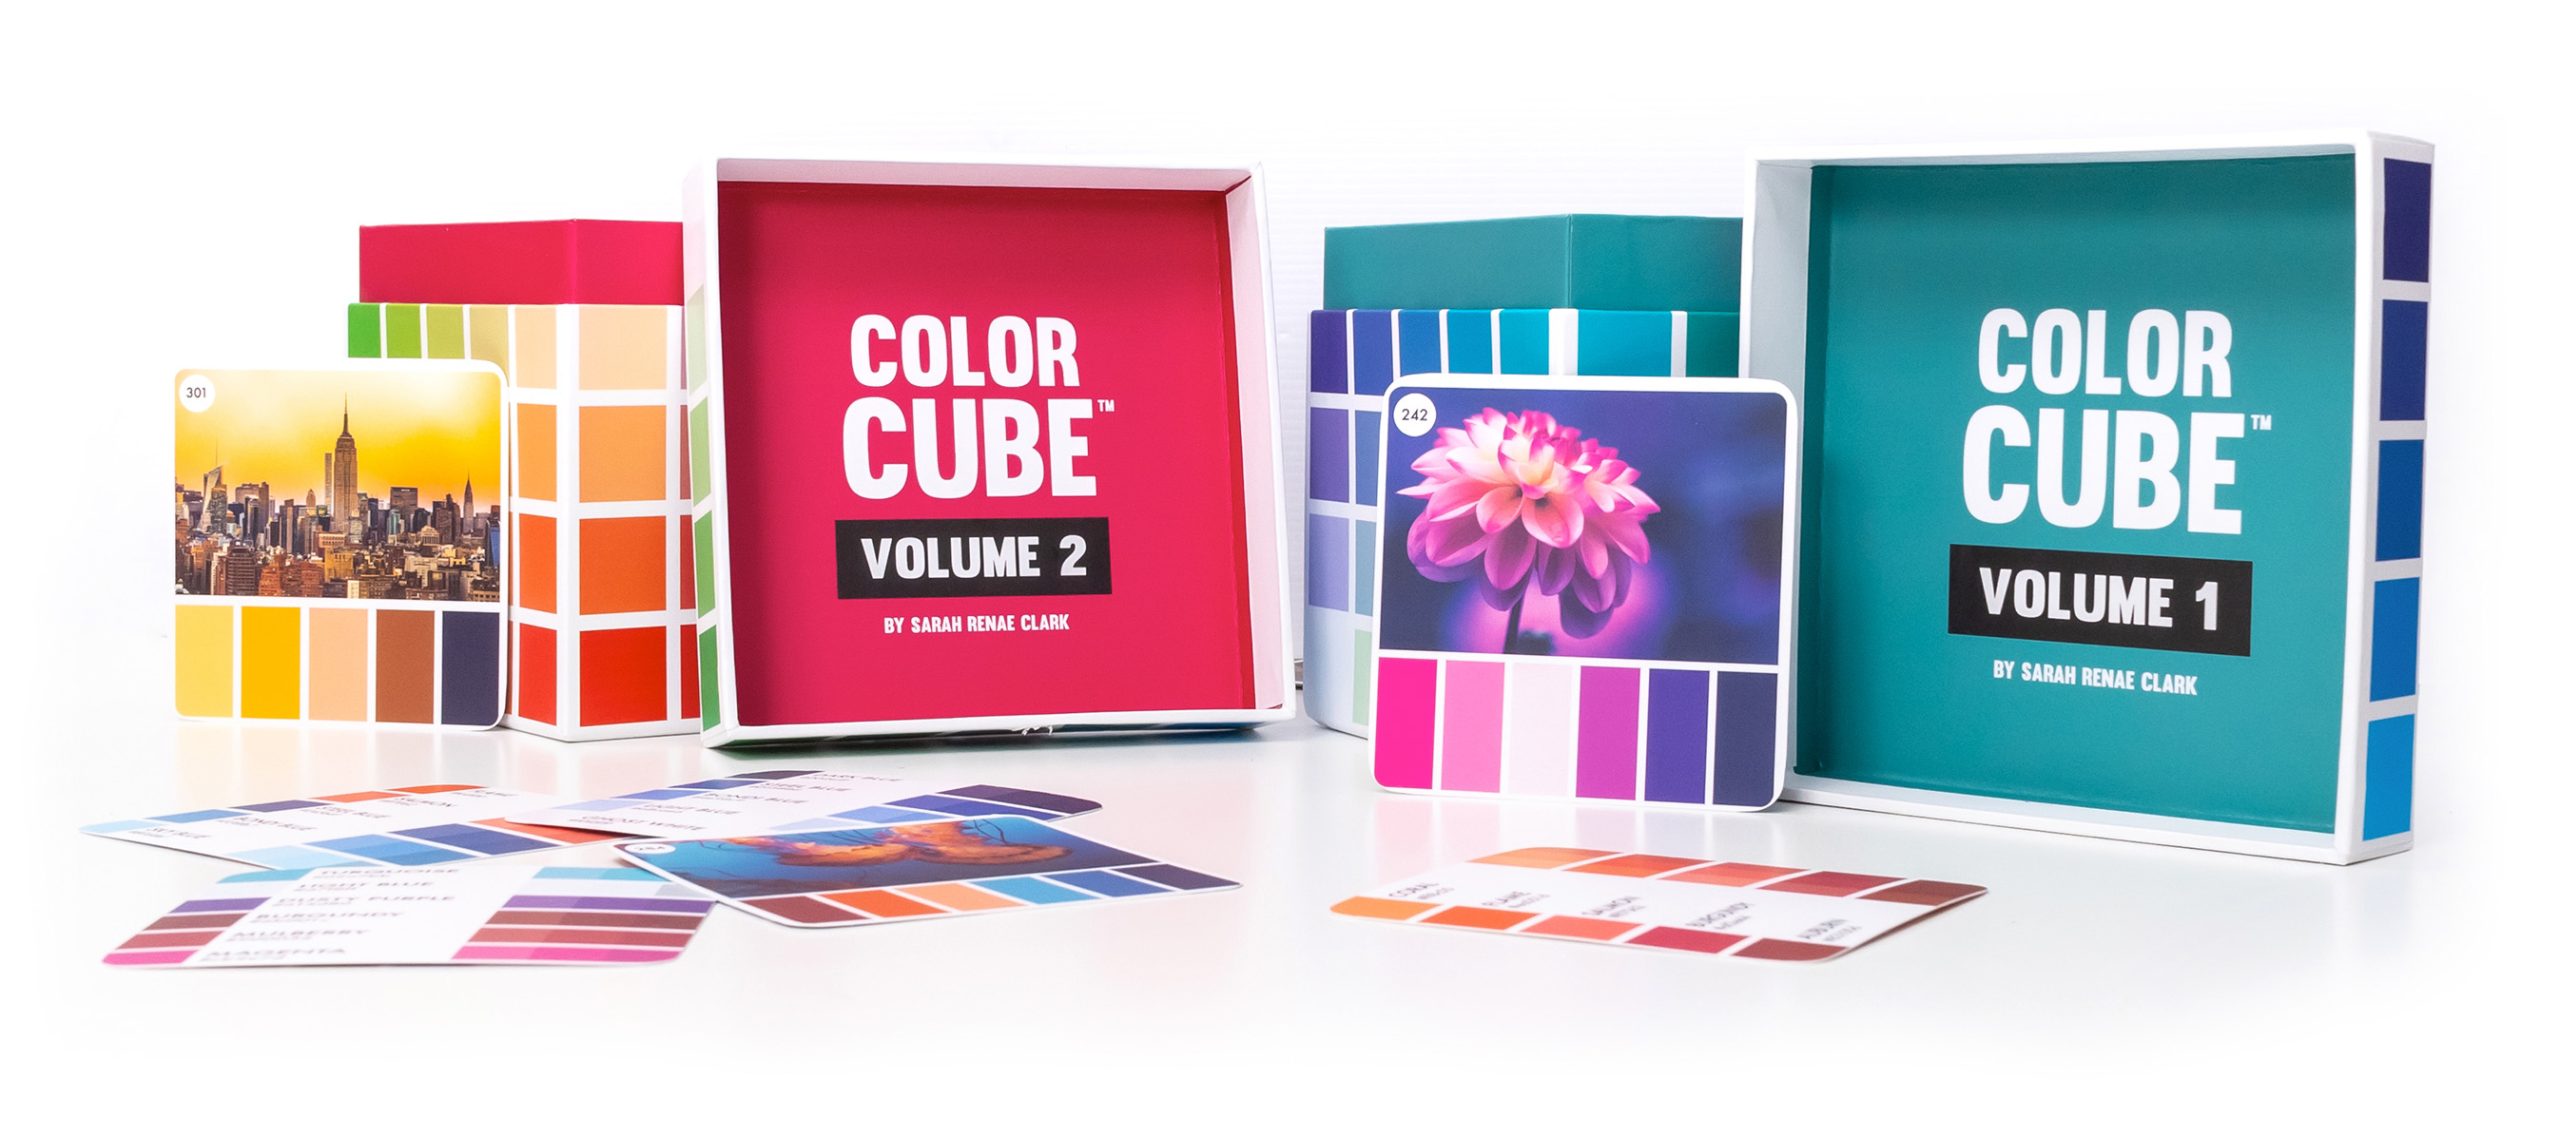 Cubes Various Combinations Colors Training Stock Vector, 55% OFF